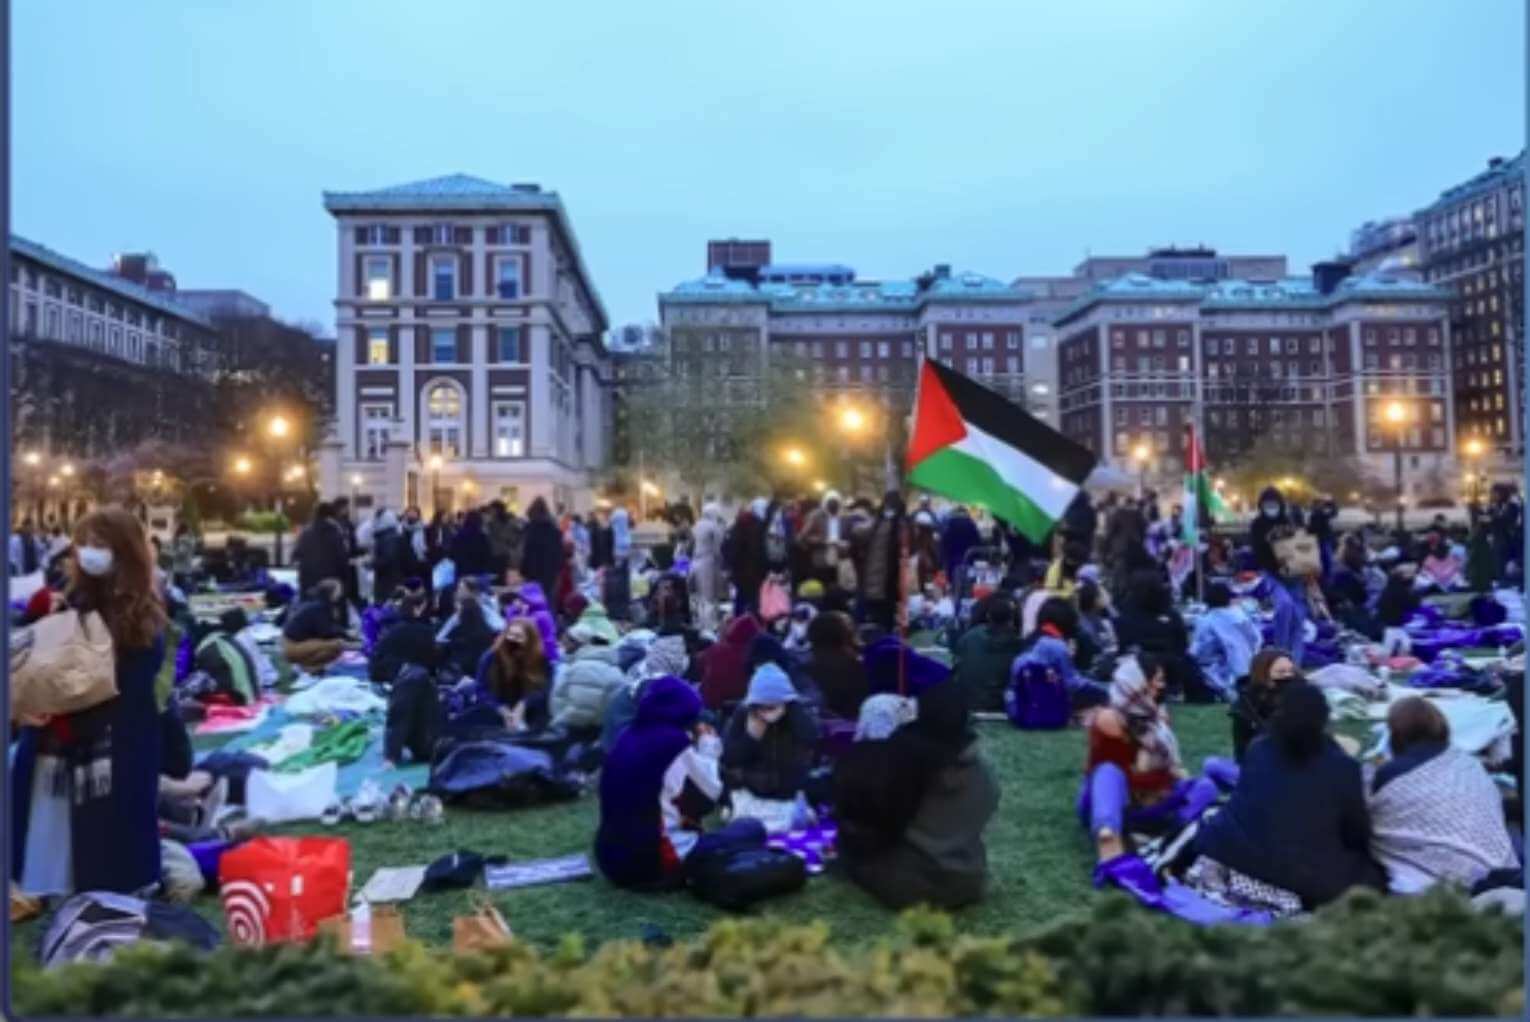 Do American Students Suddenly Have Compassion for Palestinians’ Plight?